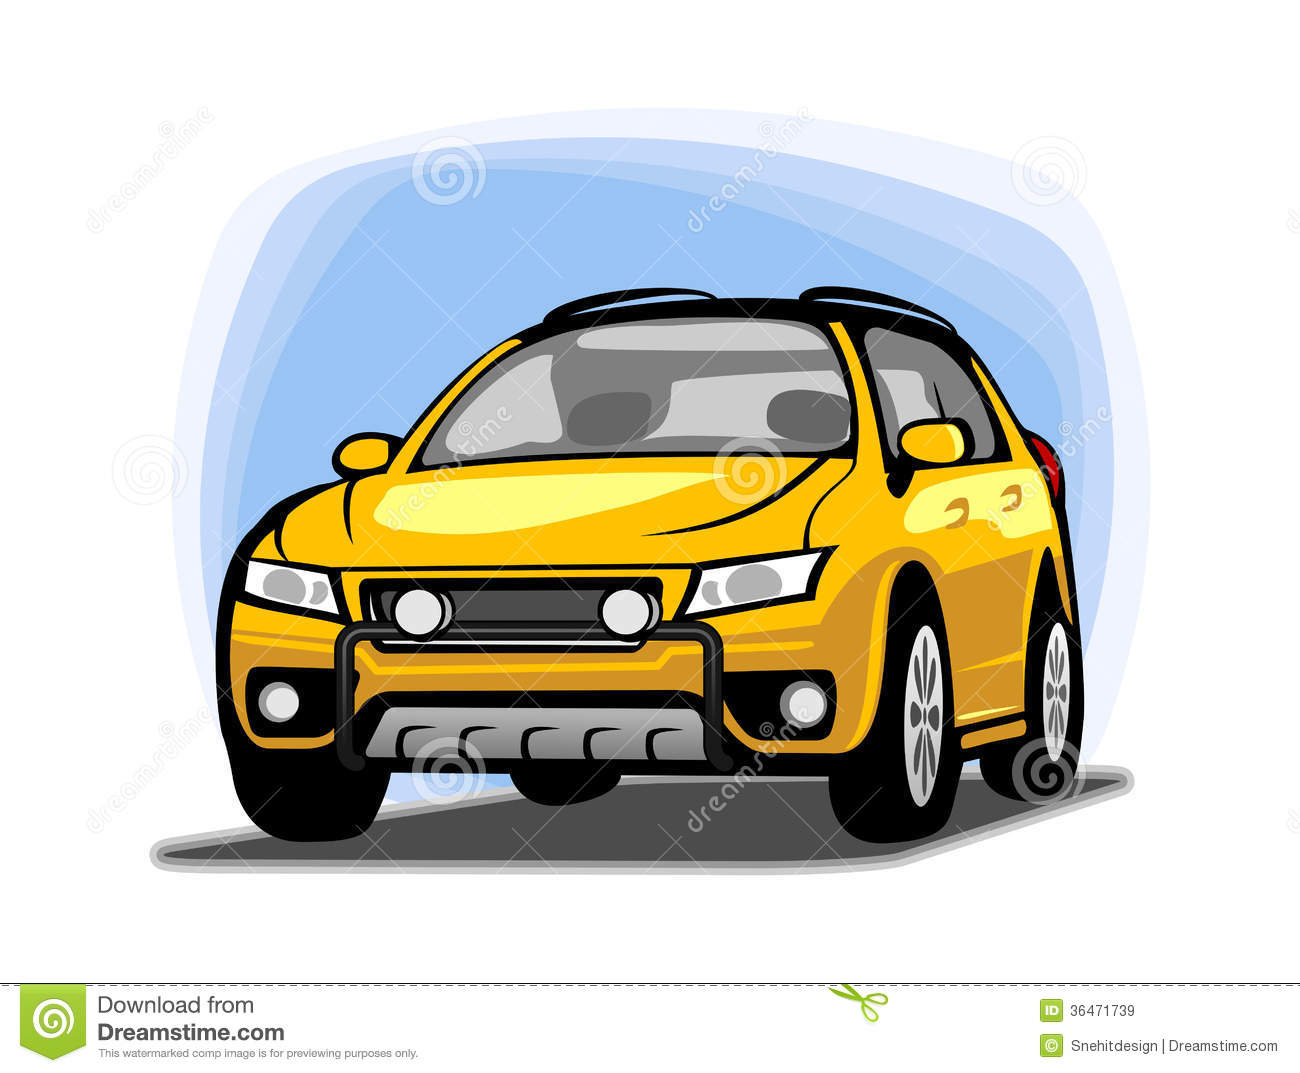 Car Clipart Royalty Free Stock Images   Image  36471739